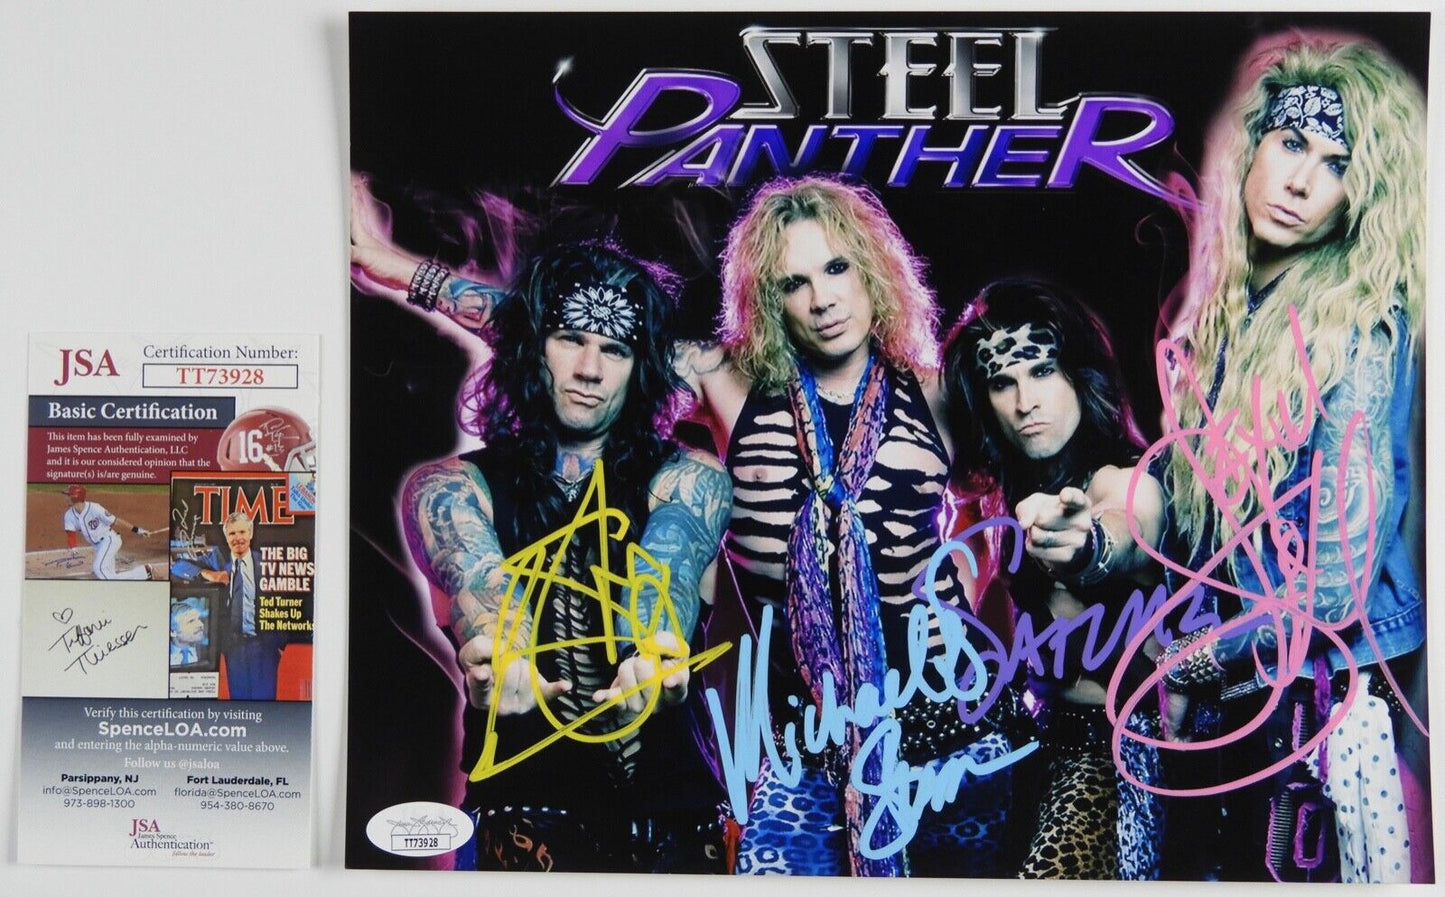 Steel Panther Fully Signed Signed JSA Autograph Photo 8 x 10 Michael Starr Stach